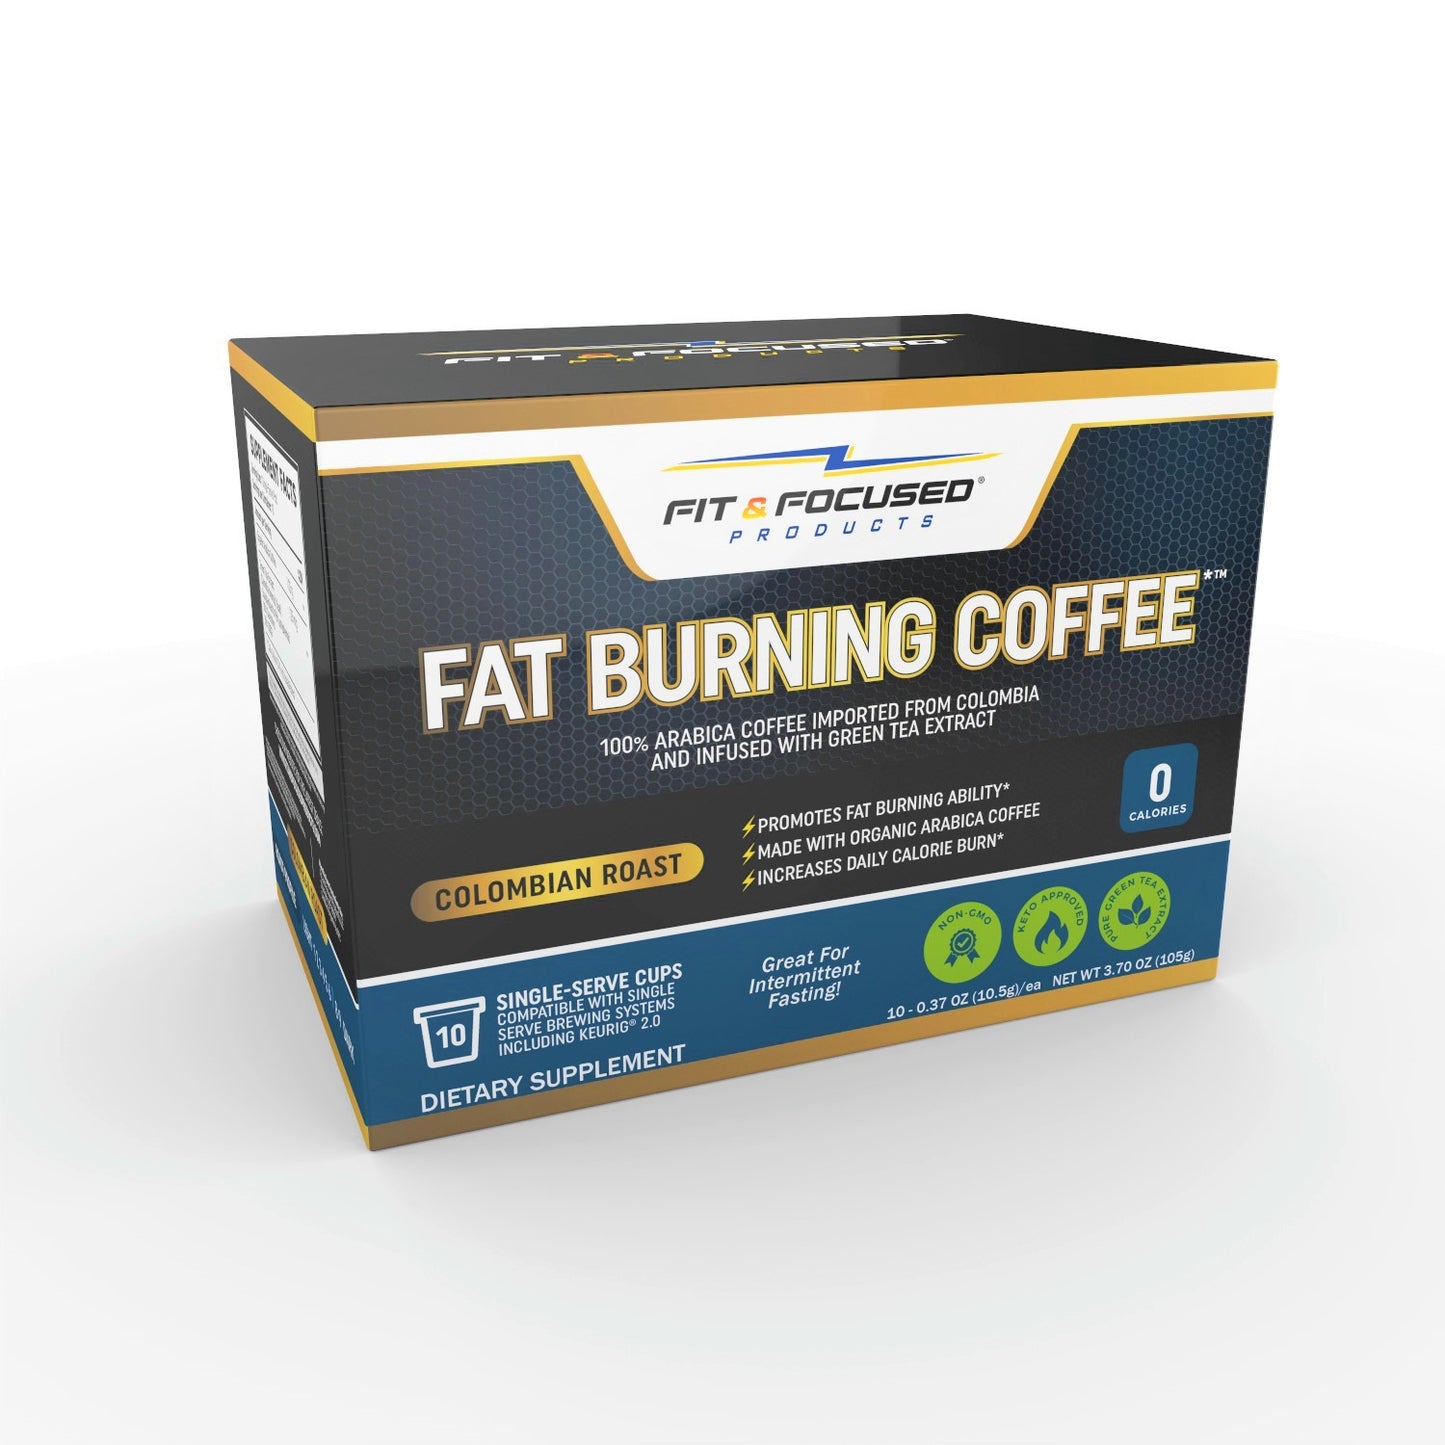 Fit & Focused Fat Burning K-Cup Coffee Box Iso View